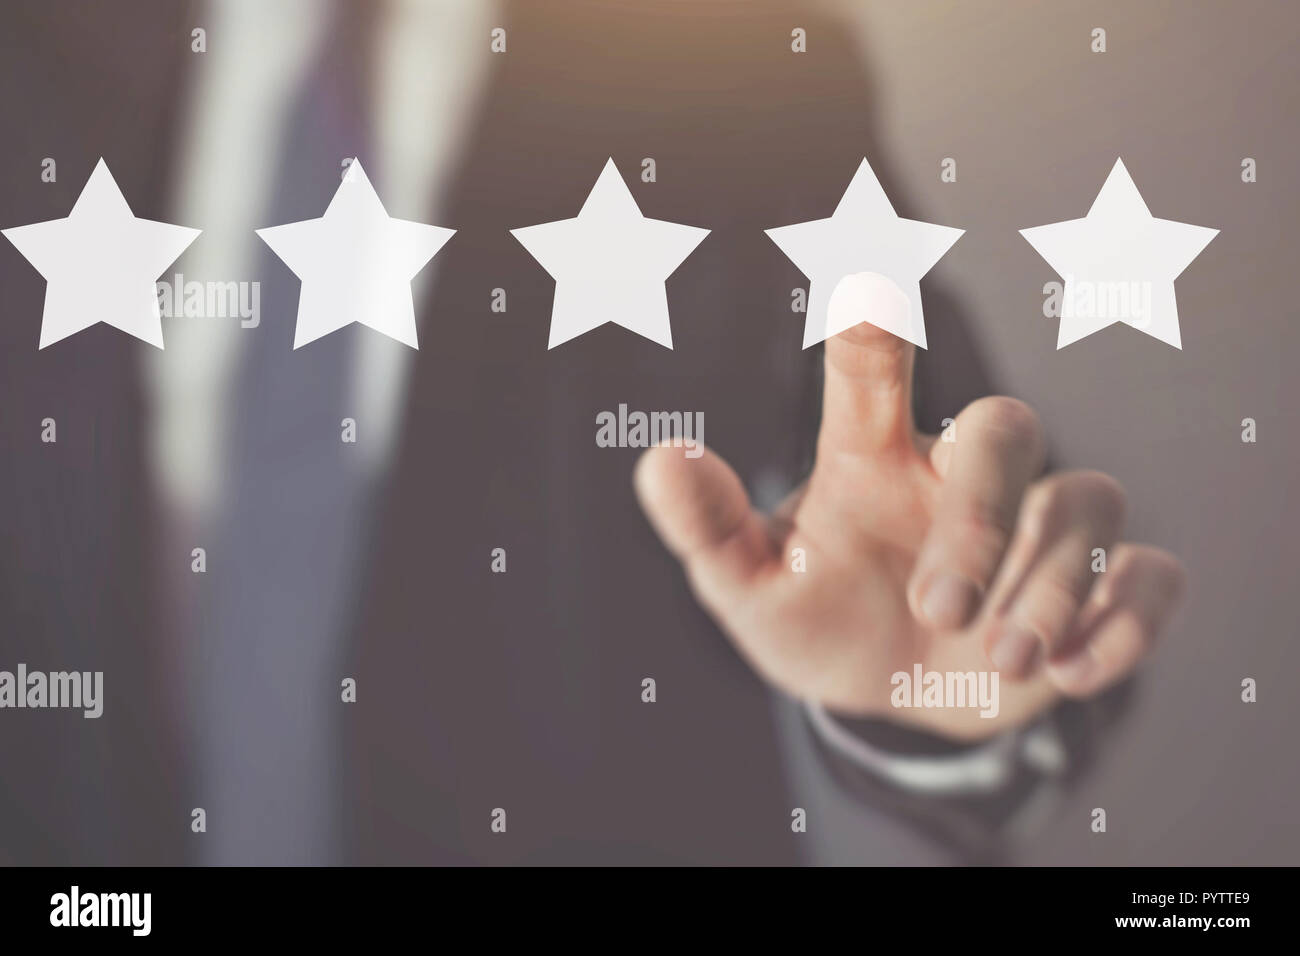 customer review and feedback, reputation management Stock Photo